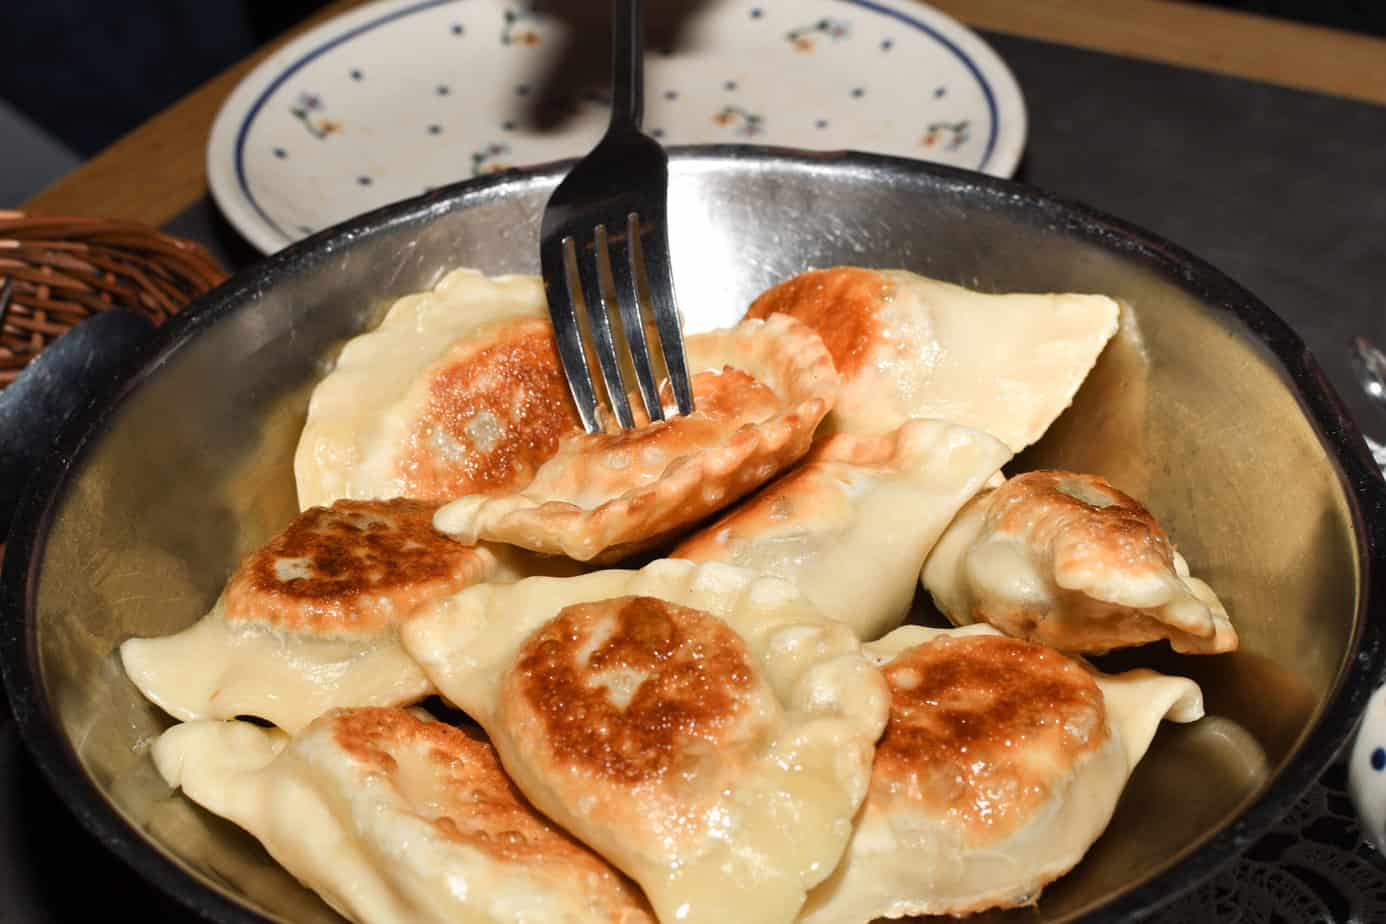 A plate of freshly baked pierogi with a fork.